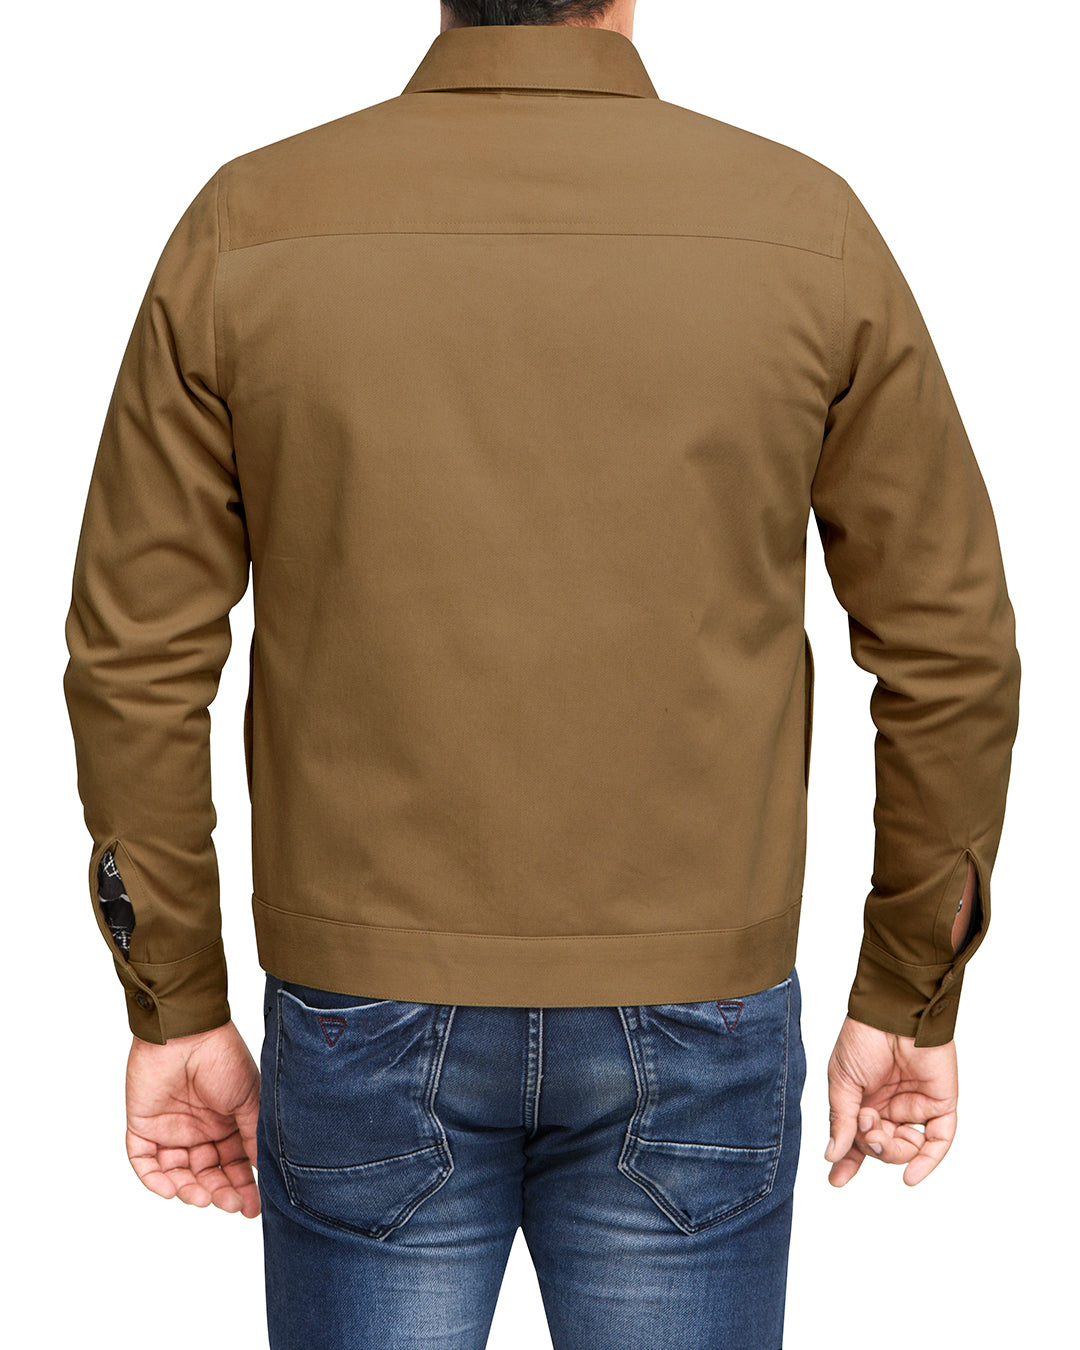 Back of model wearing the twill shirt jacket for men by Luxire in khaki